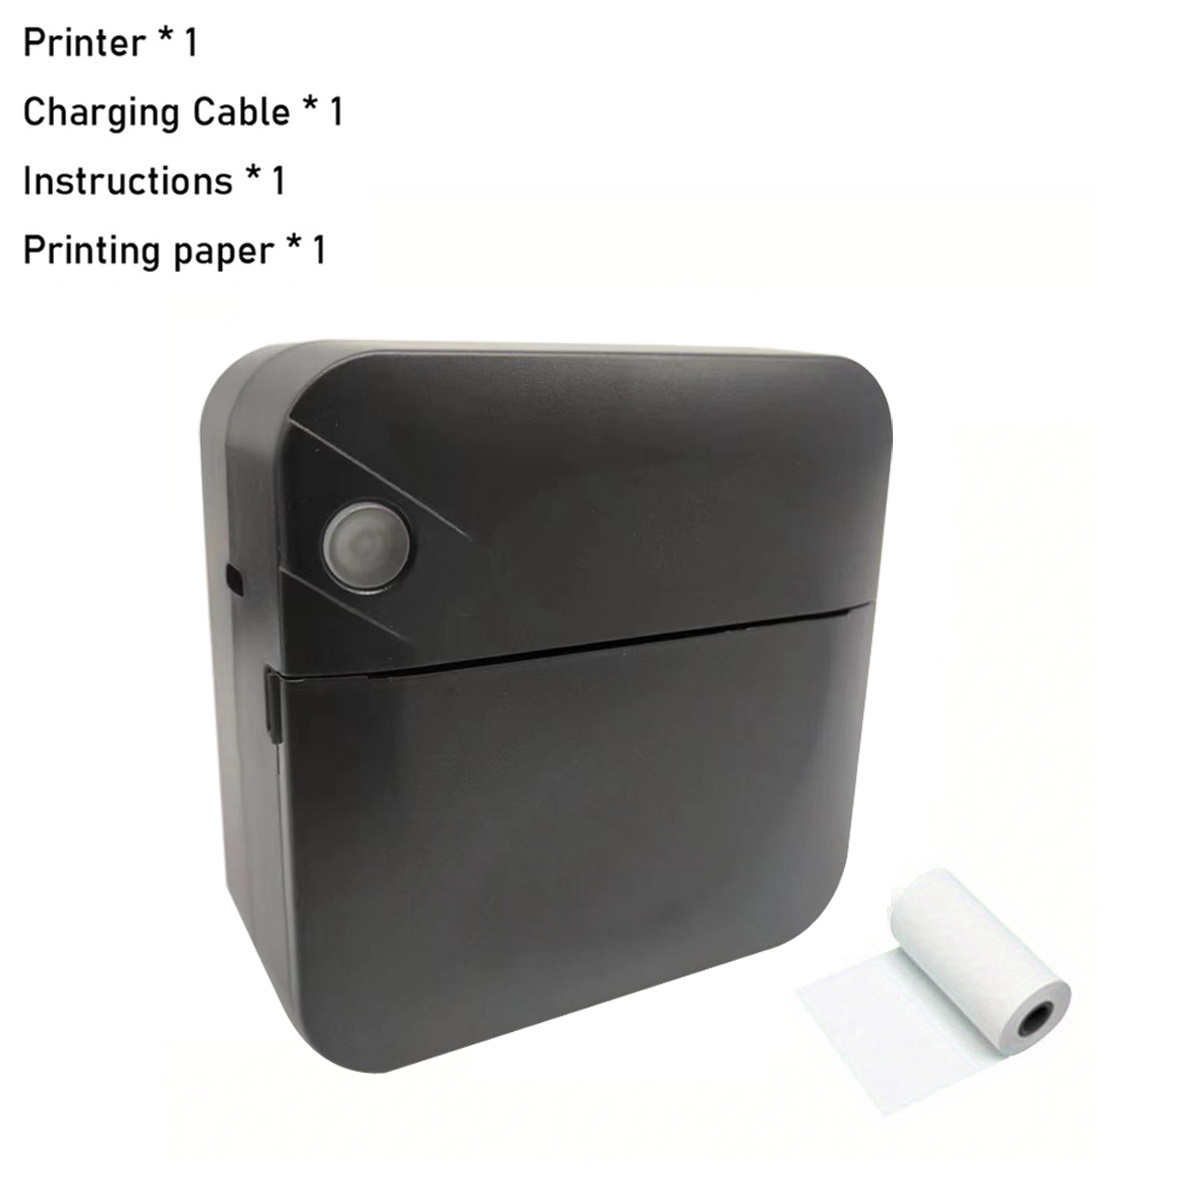 Inkless Instant Photo and Label Printer, Photo